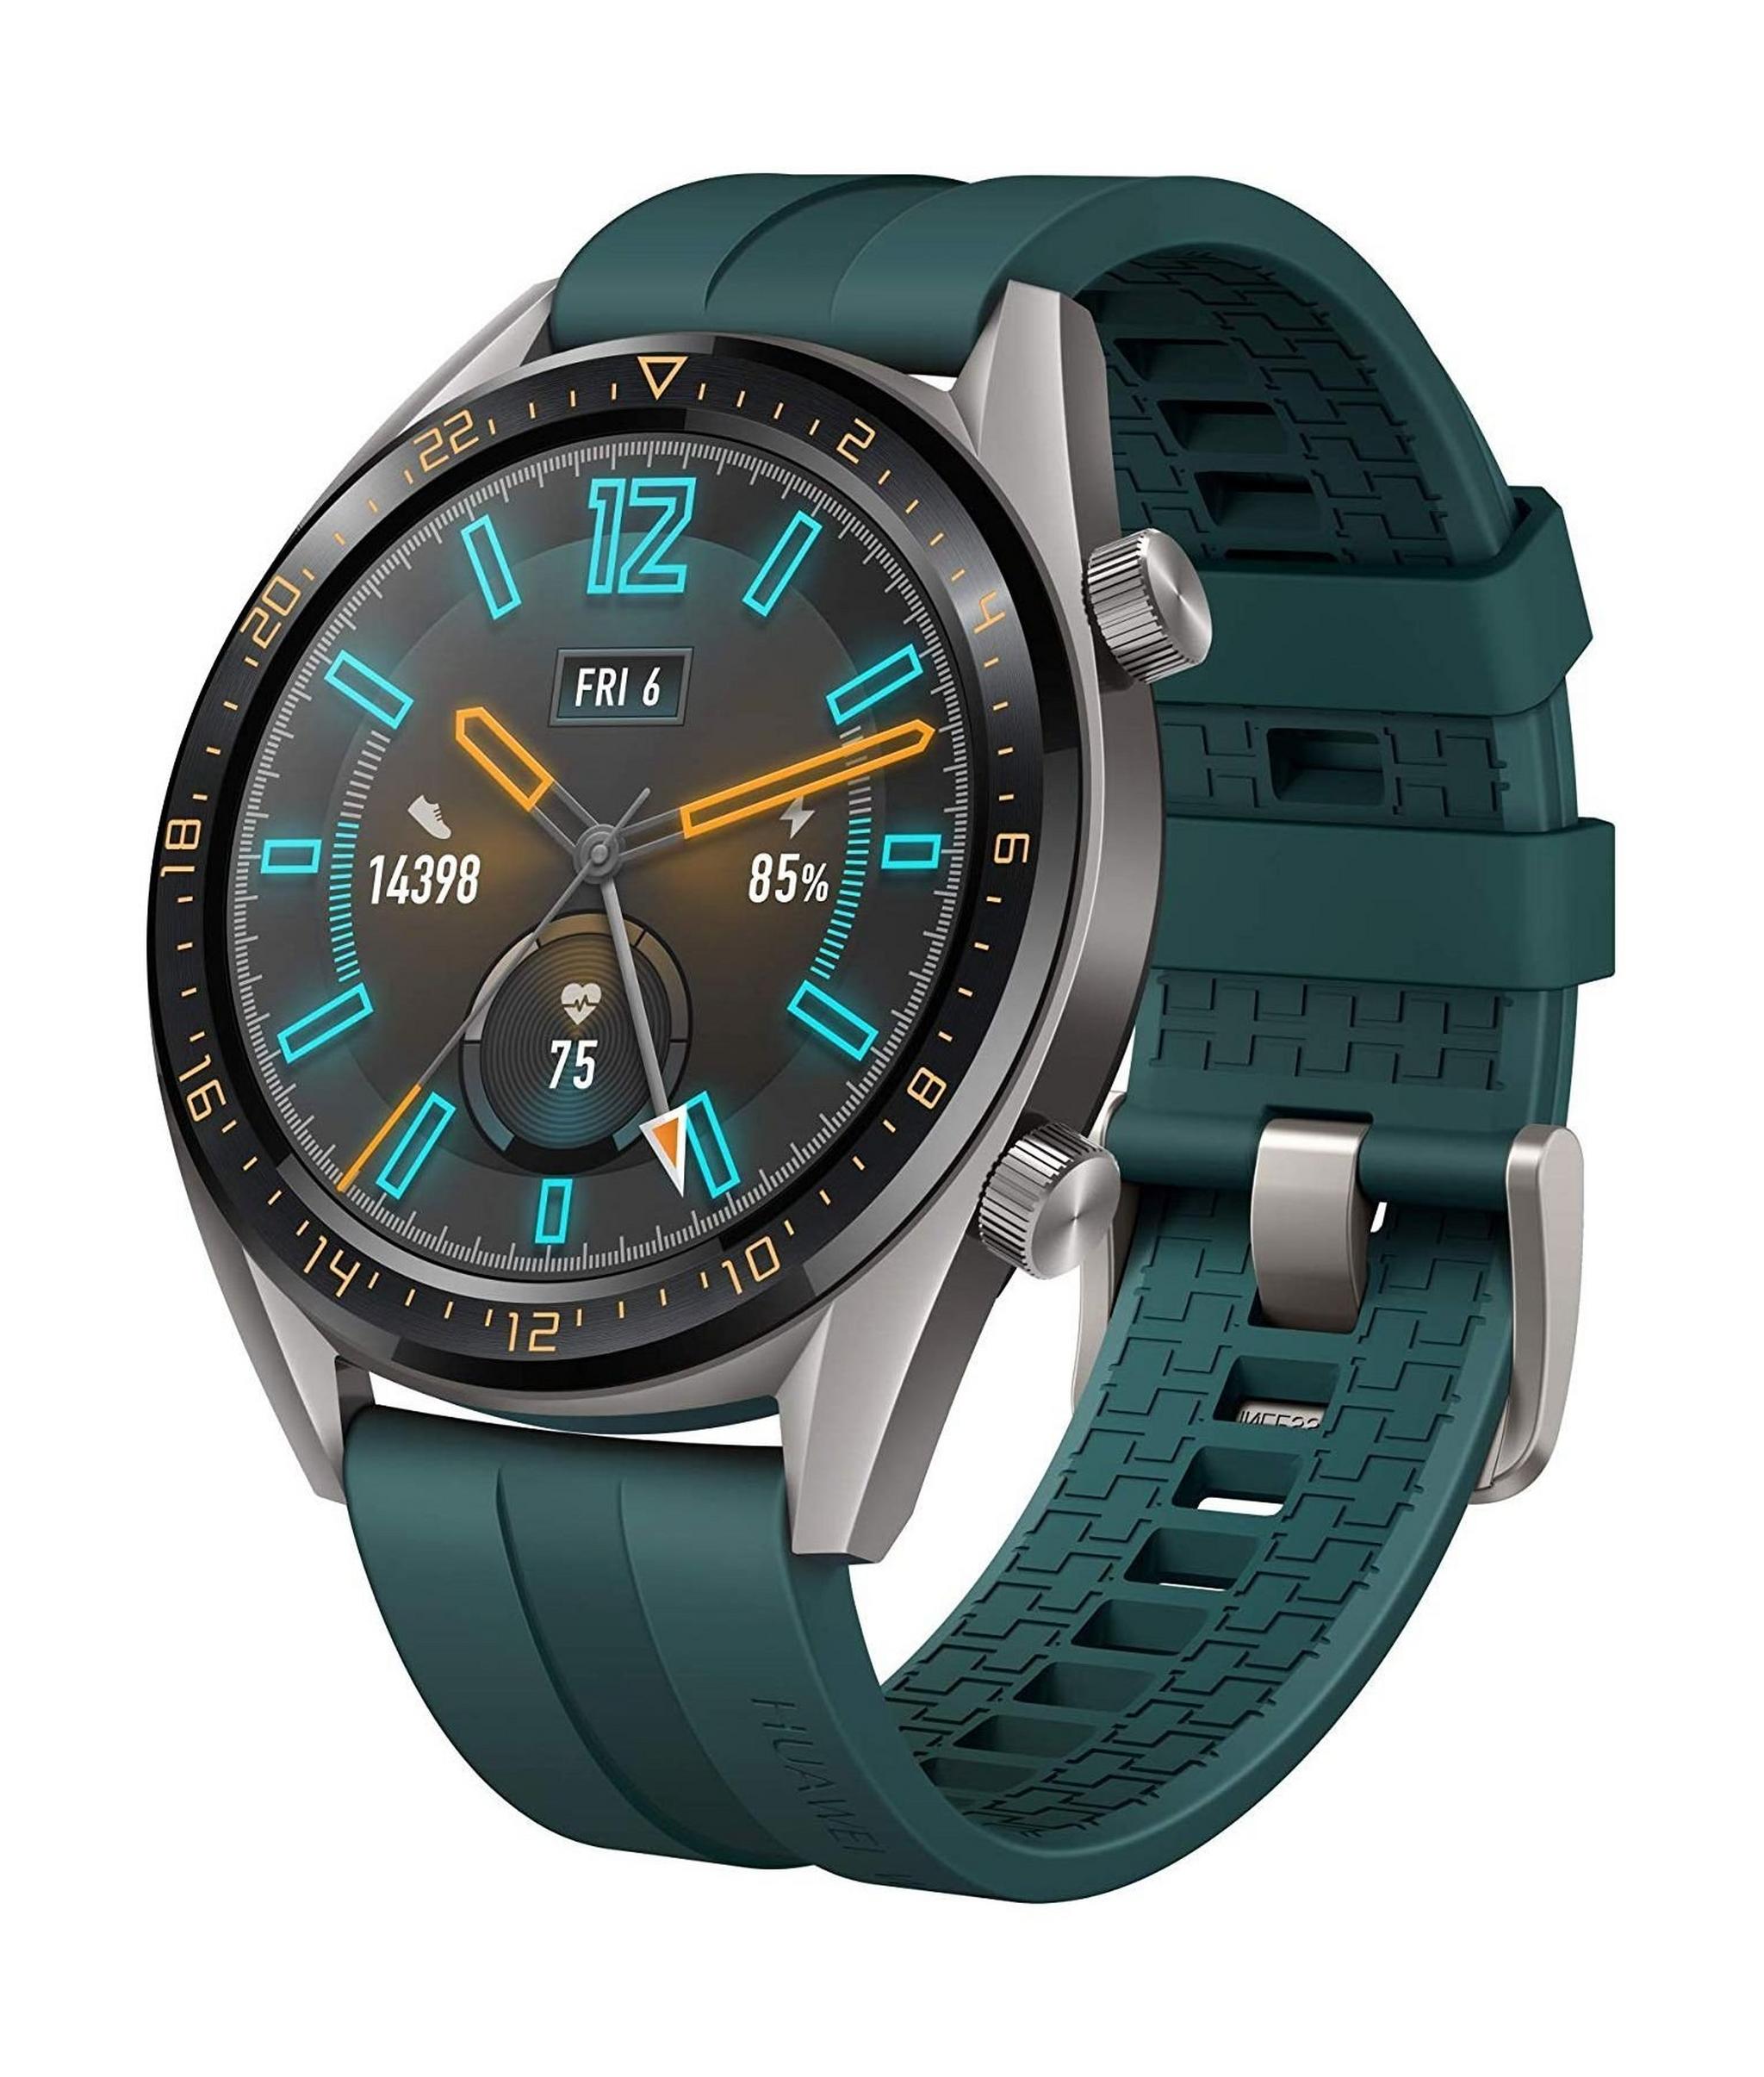 Huawei GT Watch, Stainless-Steel Body, Leather Strap  - Green